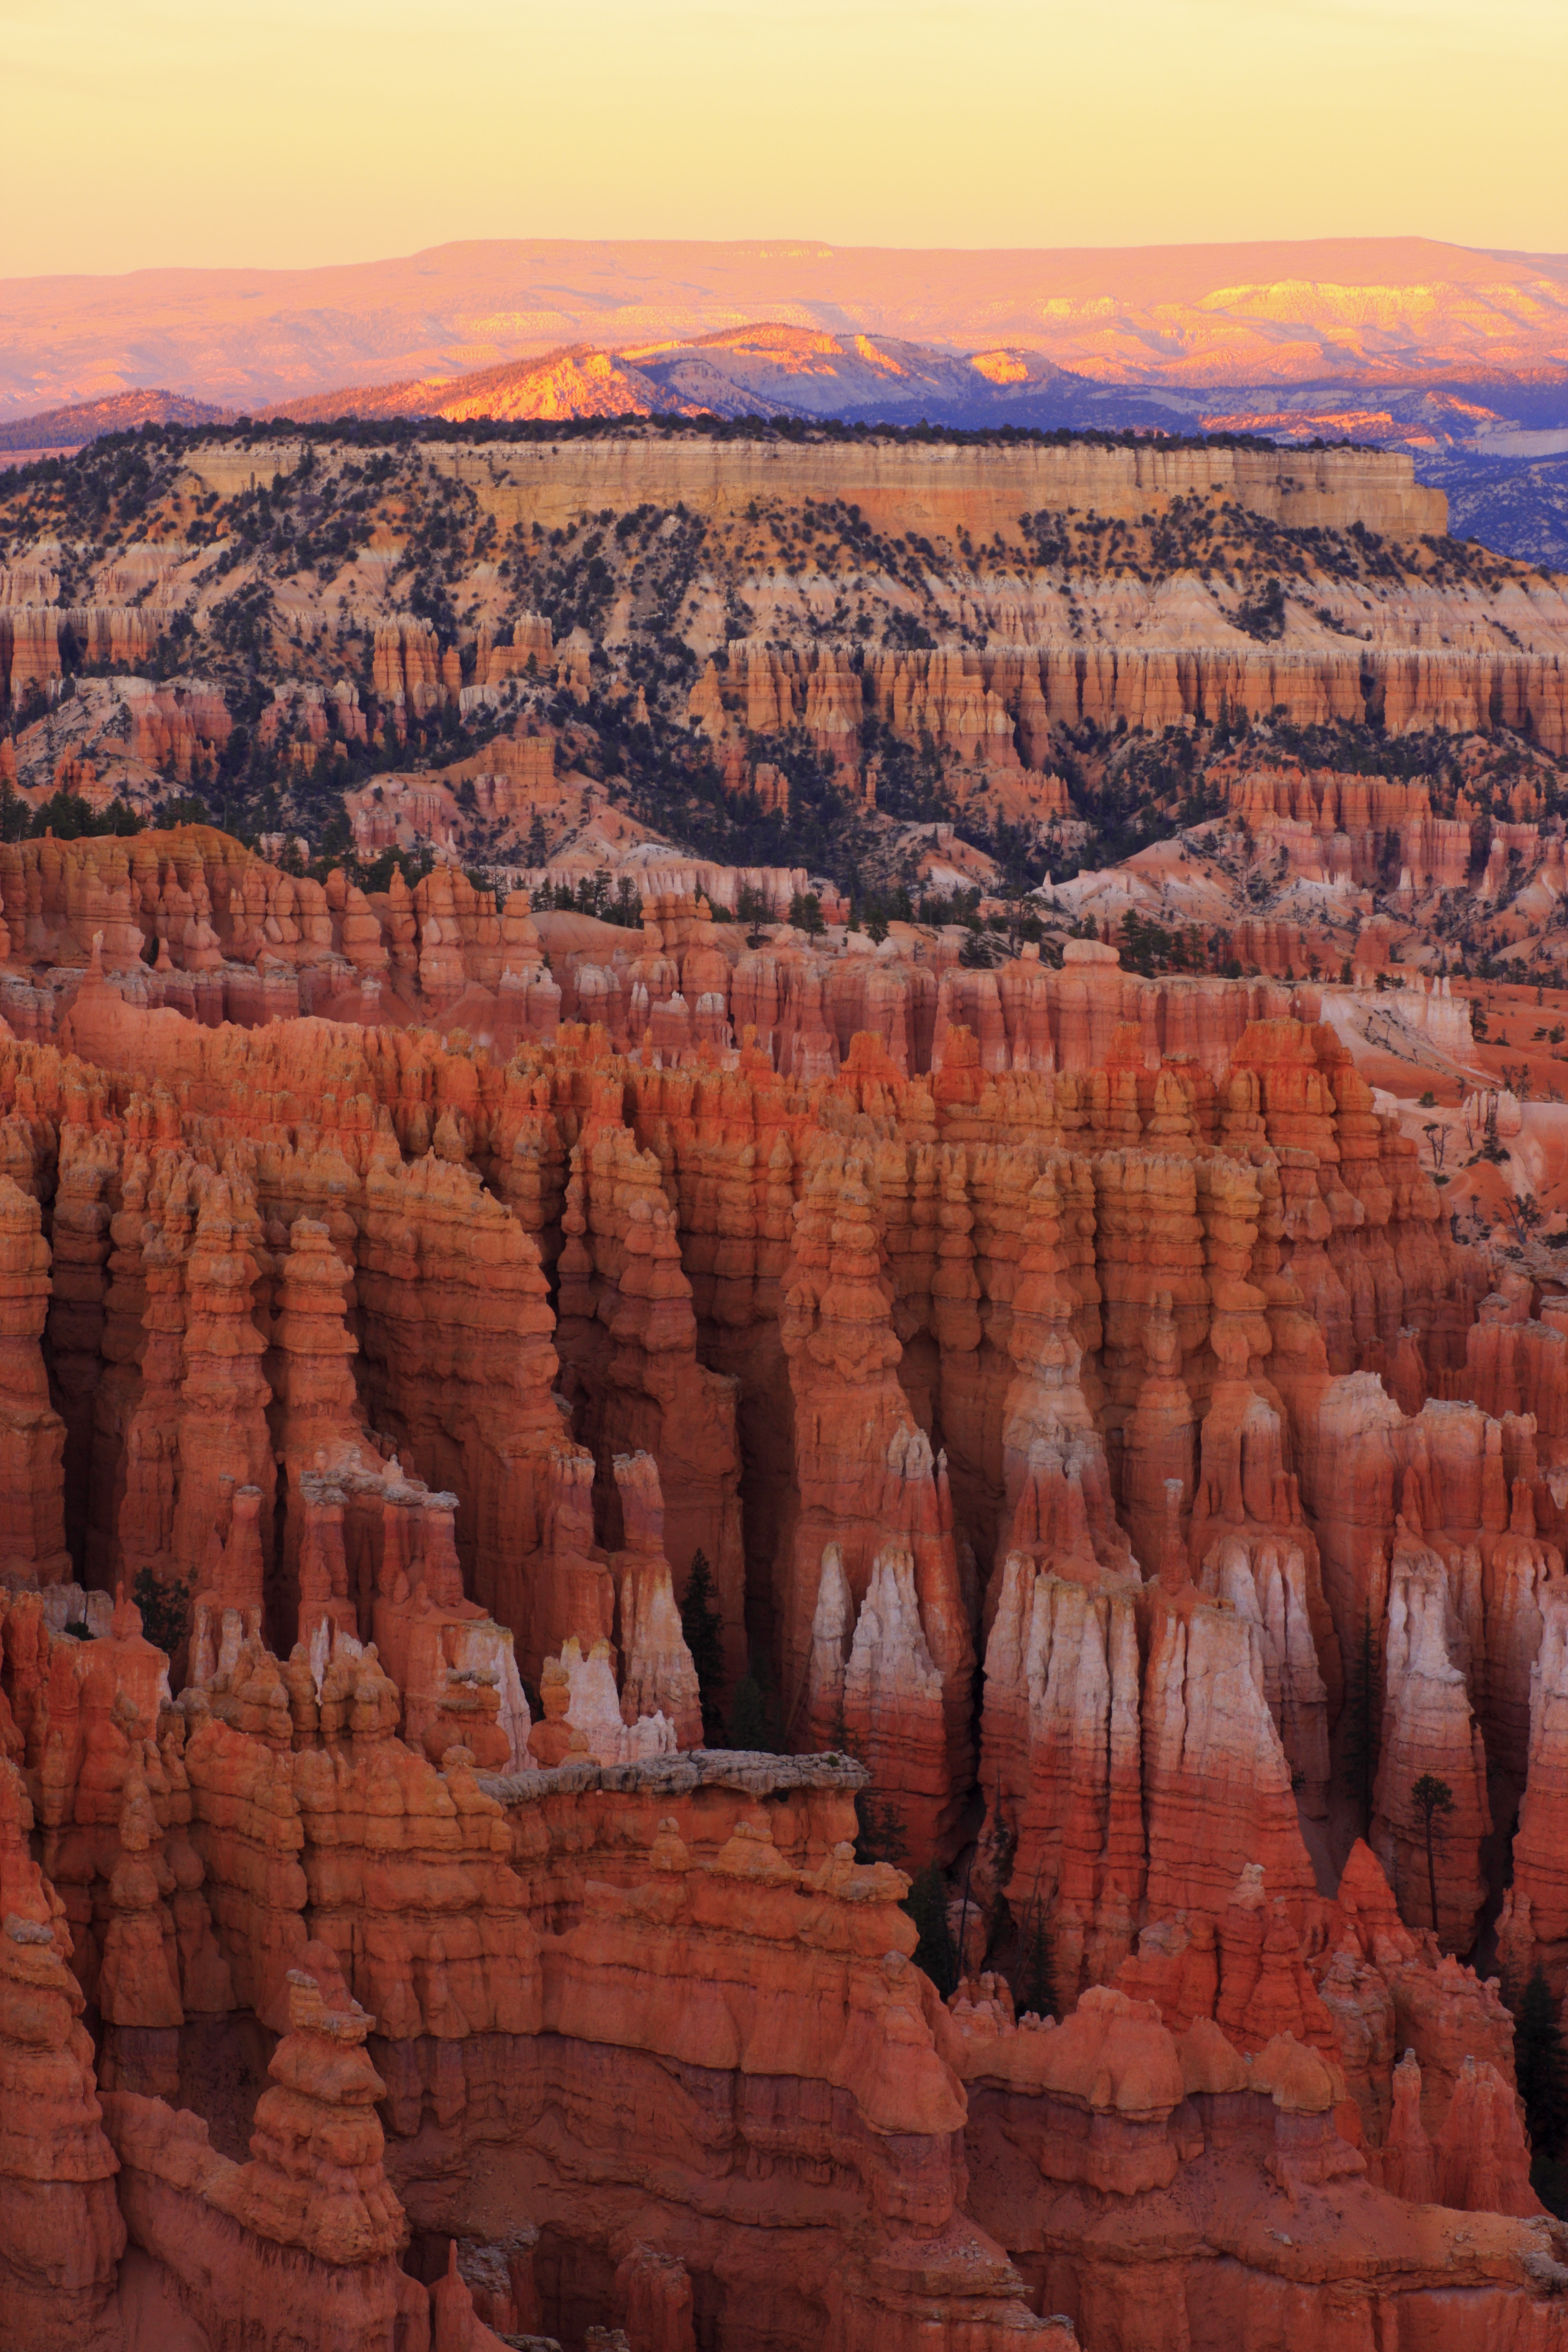 sunrise over bryce canyon hoodoo rock formations